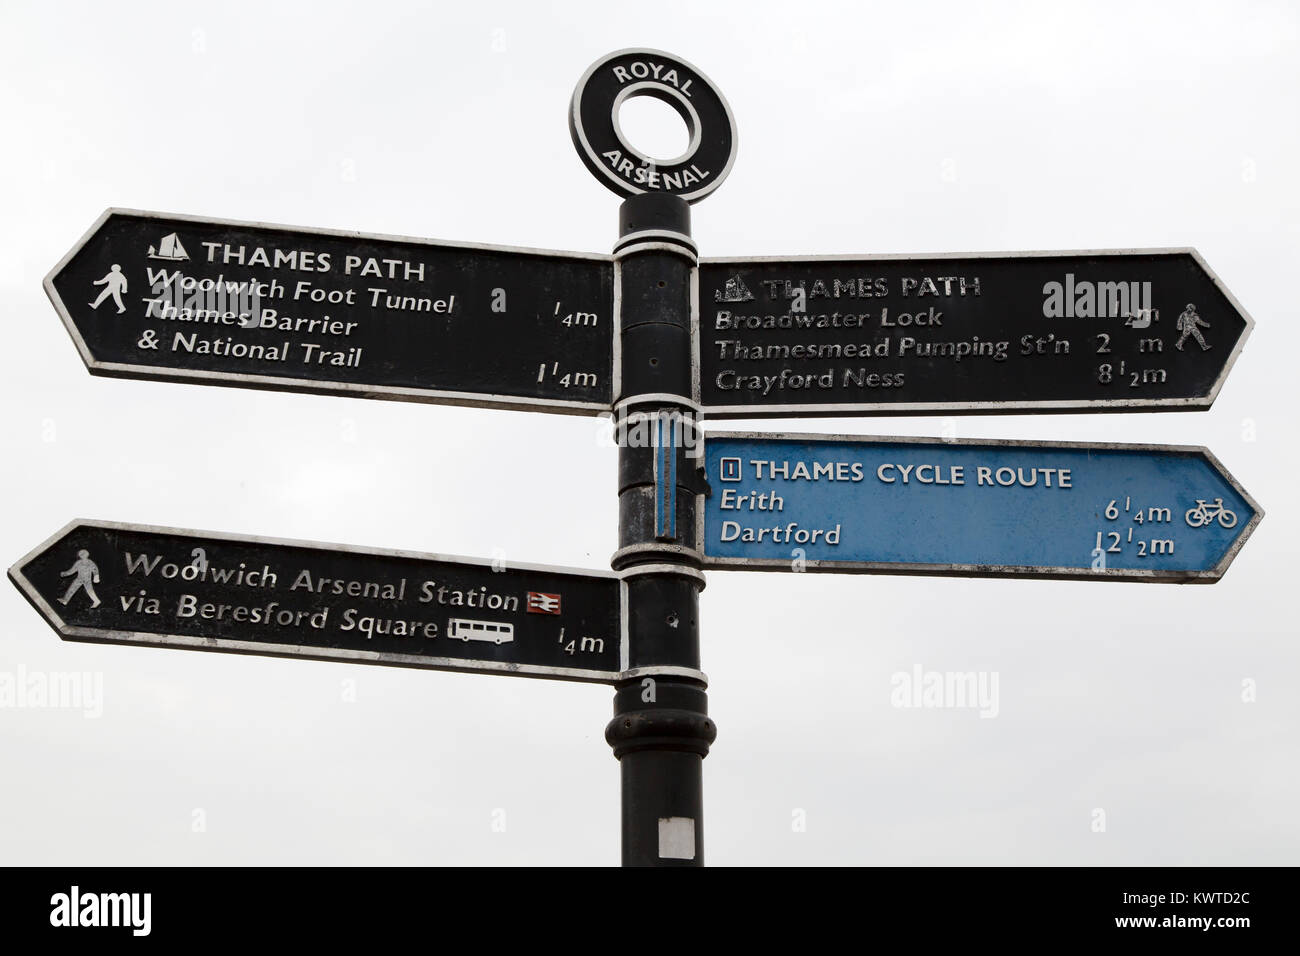 Sign at Royal Arsenal in London, England. The sign points to places of interest along the footpath and cycle track running alongside the River Thames. Stock Photo